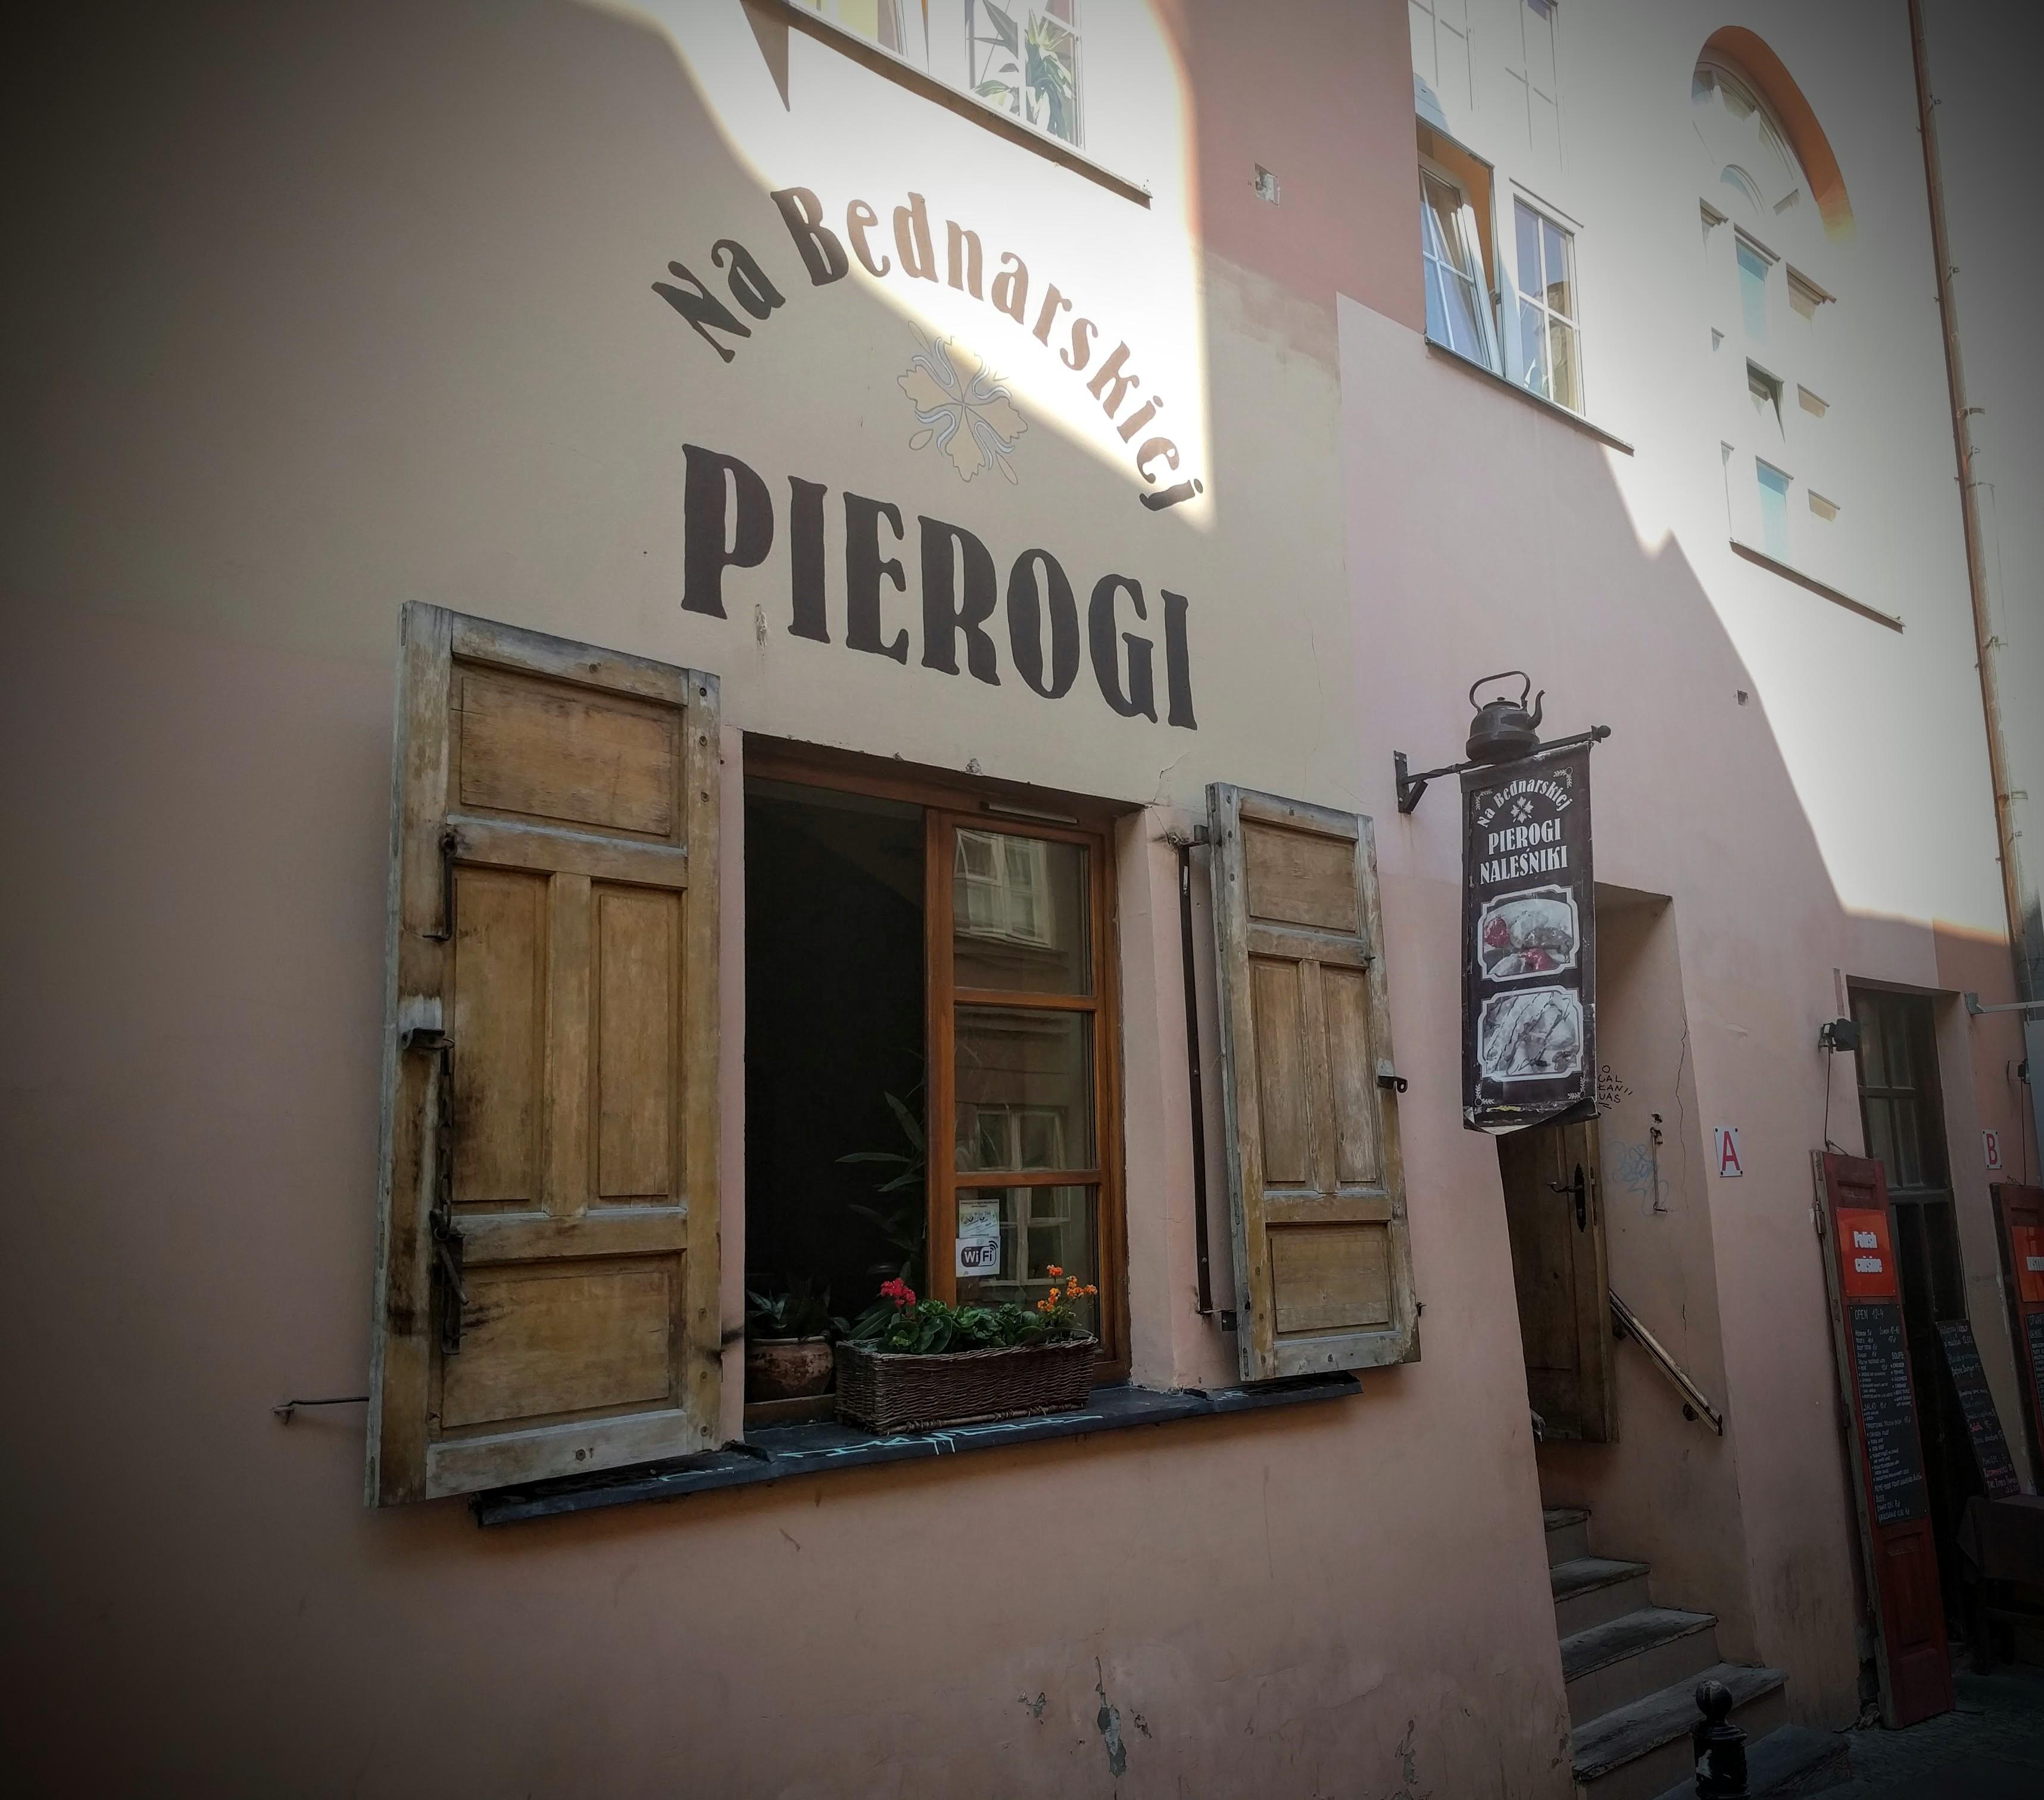 Cover image of this place Pierogarnia na Bednarskiej